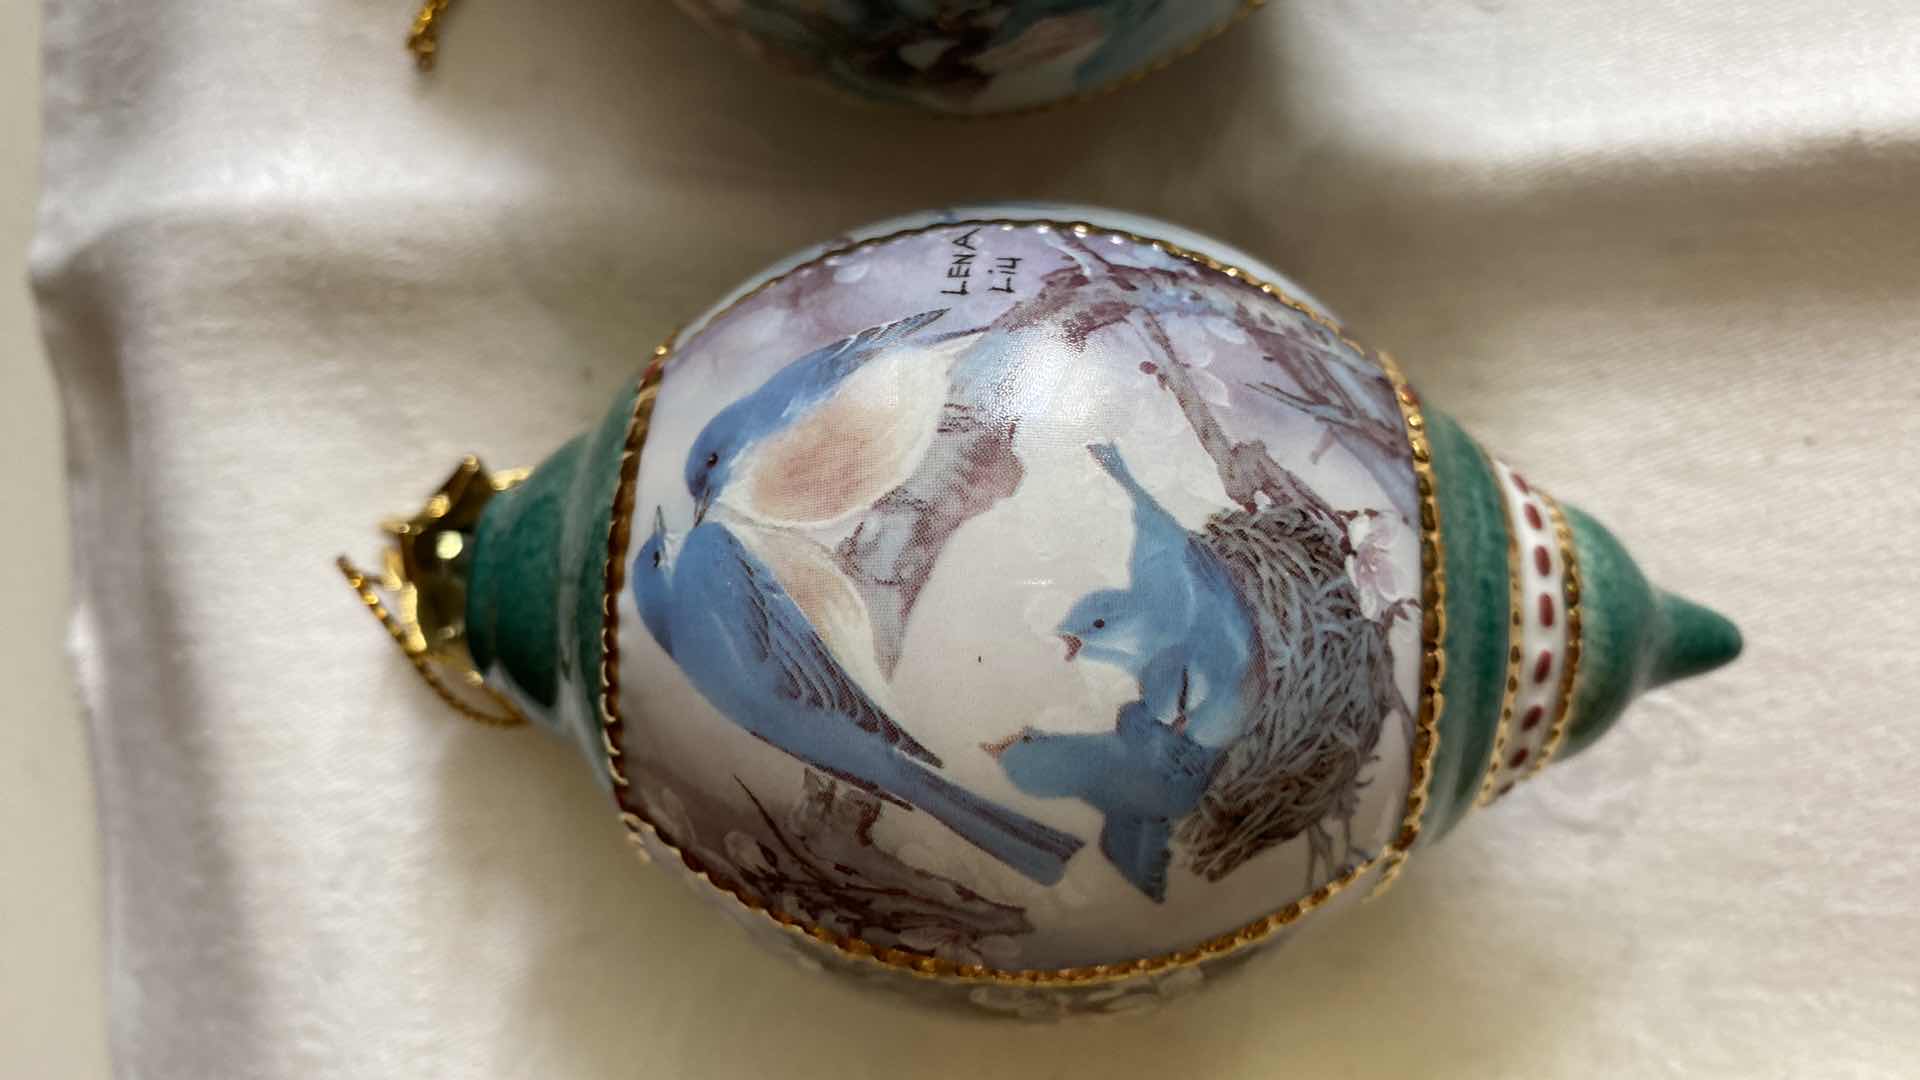 Photo 3 of VINTAGE THREE LENA LIU’s NATURES POETRY PORCELAIN ORNAMENTS COLLECTIBLES BY BRADFORD EXCHANGE WITH CERTIFICATE OF AUTHENTICITY